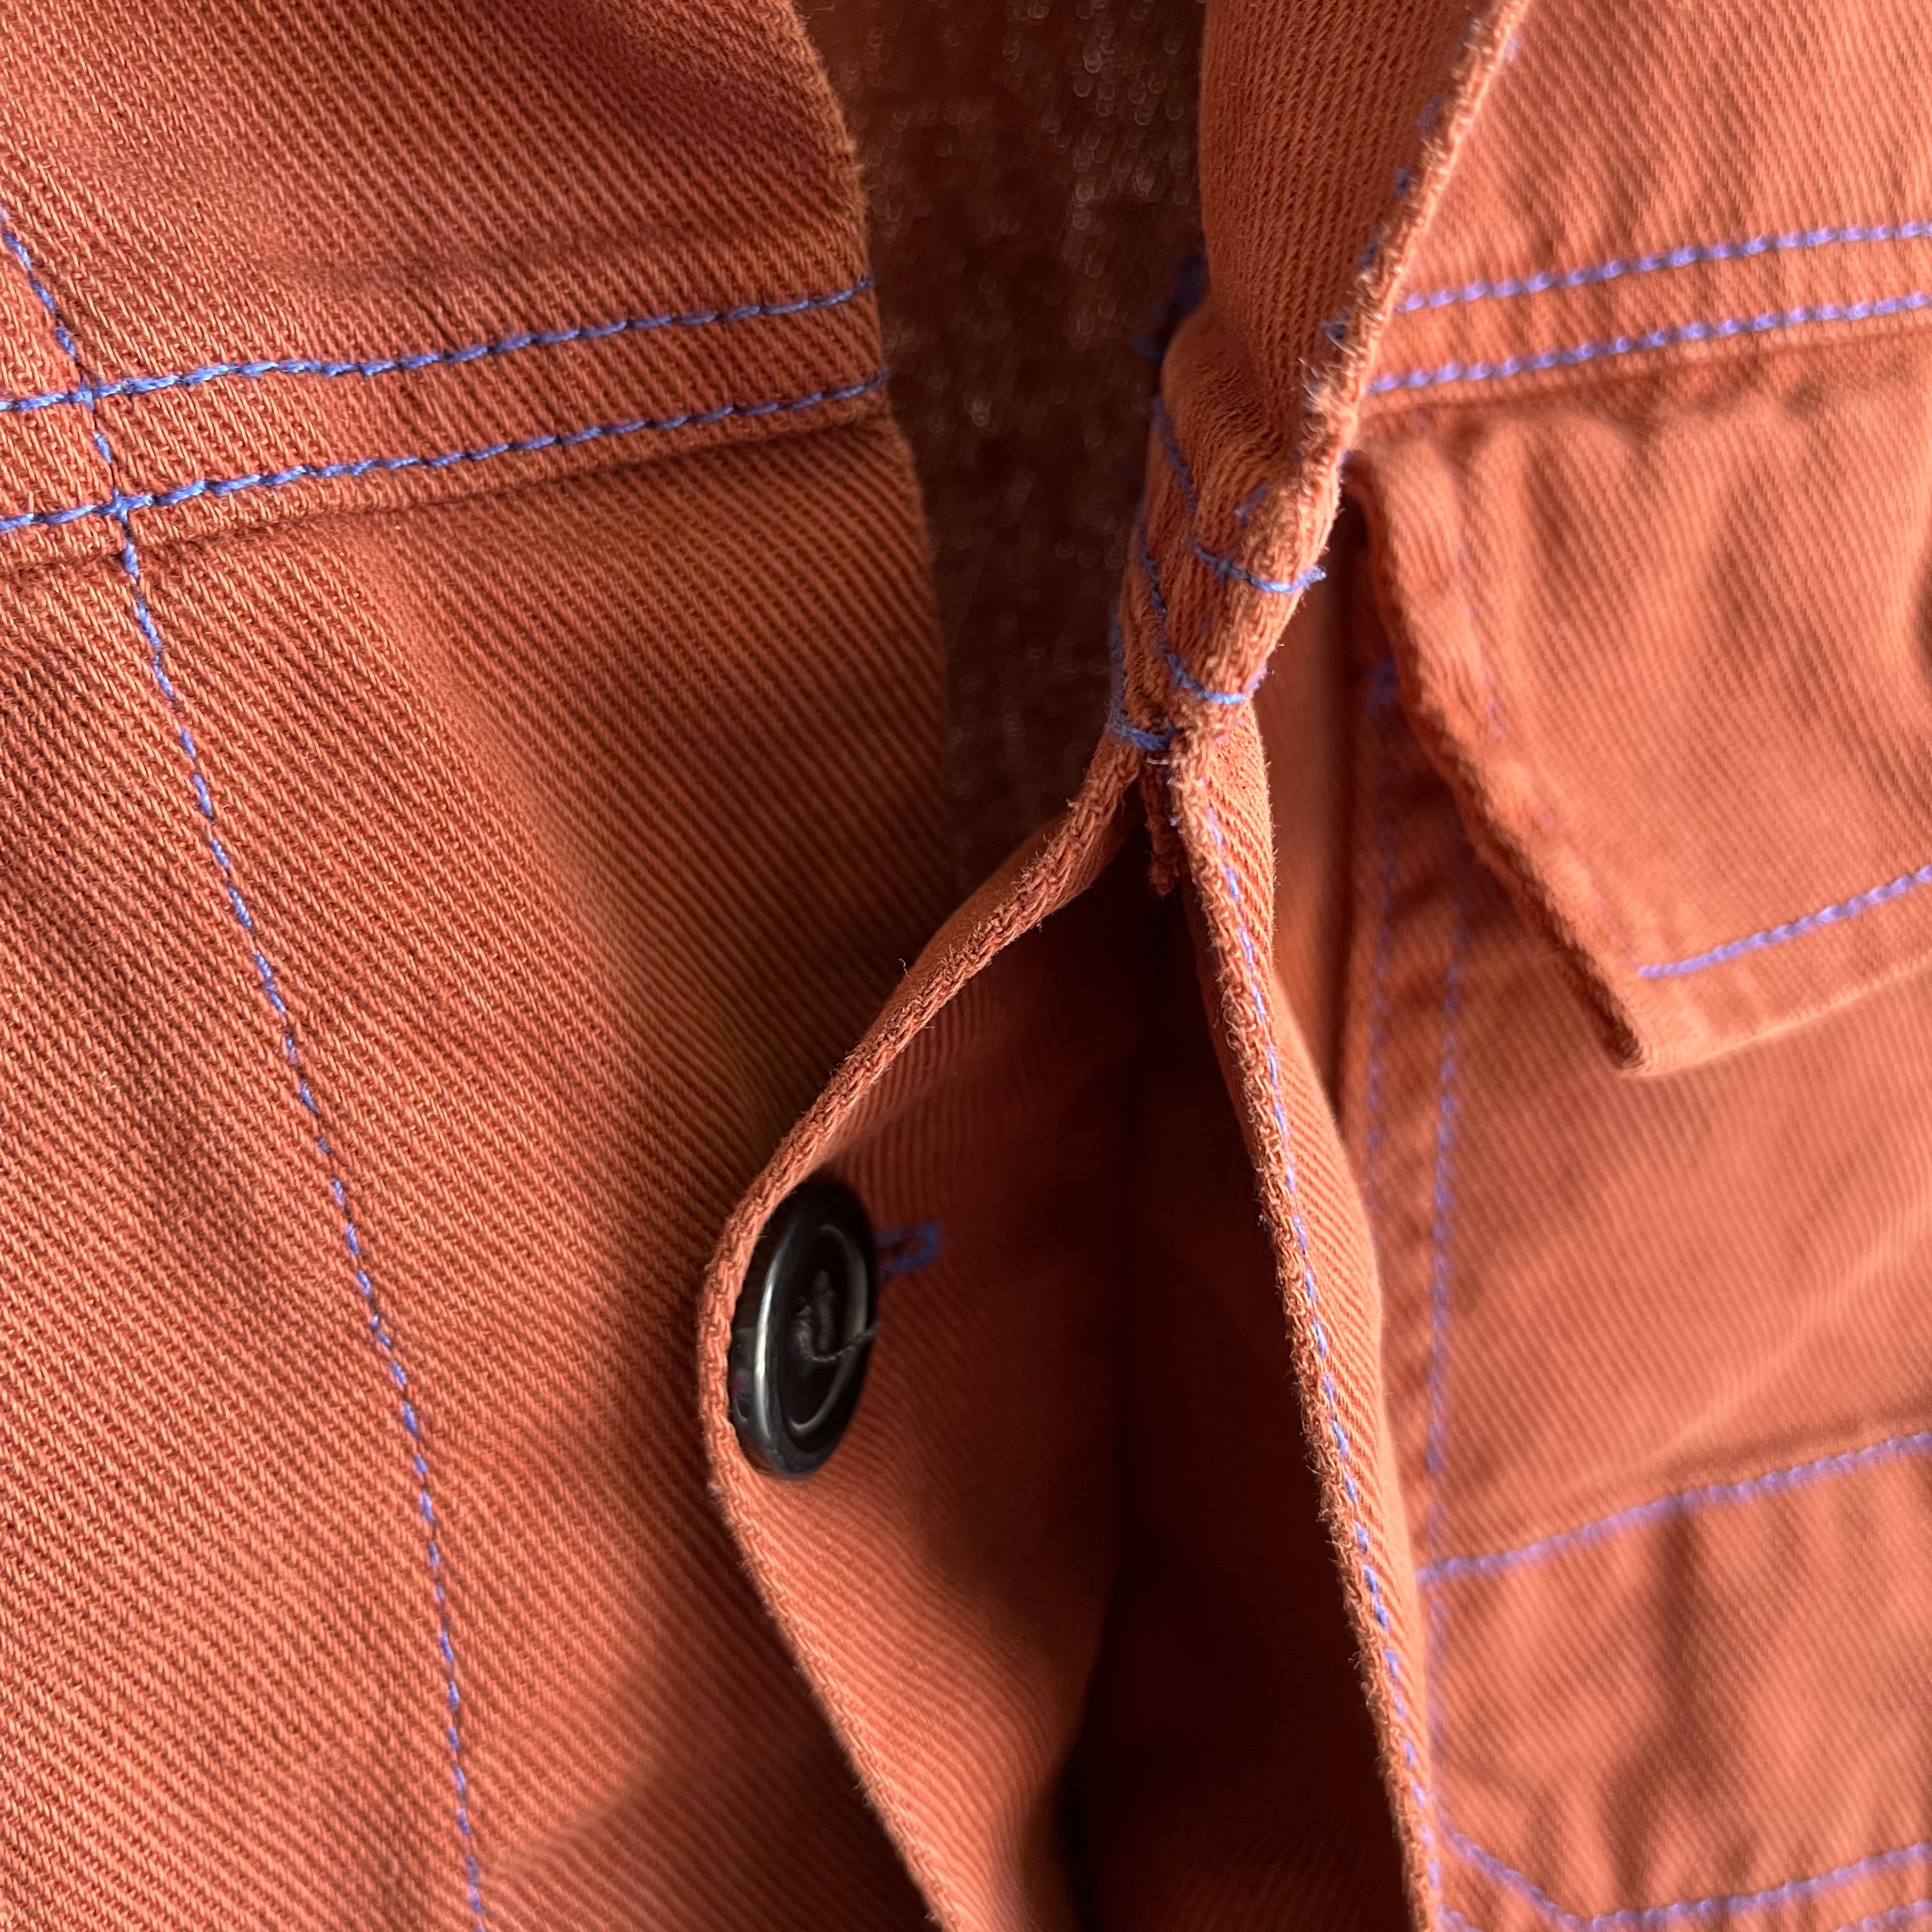 1990s Re-Dyed Blue to Rusty Brown European Workwear Cotton Chore Coat